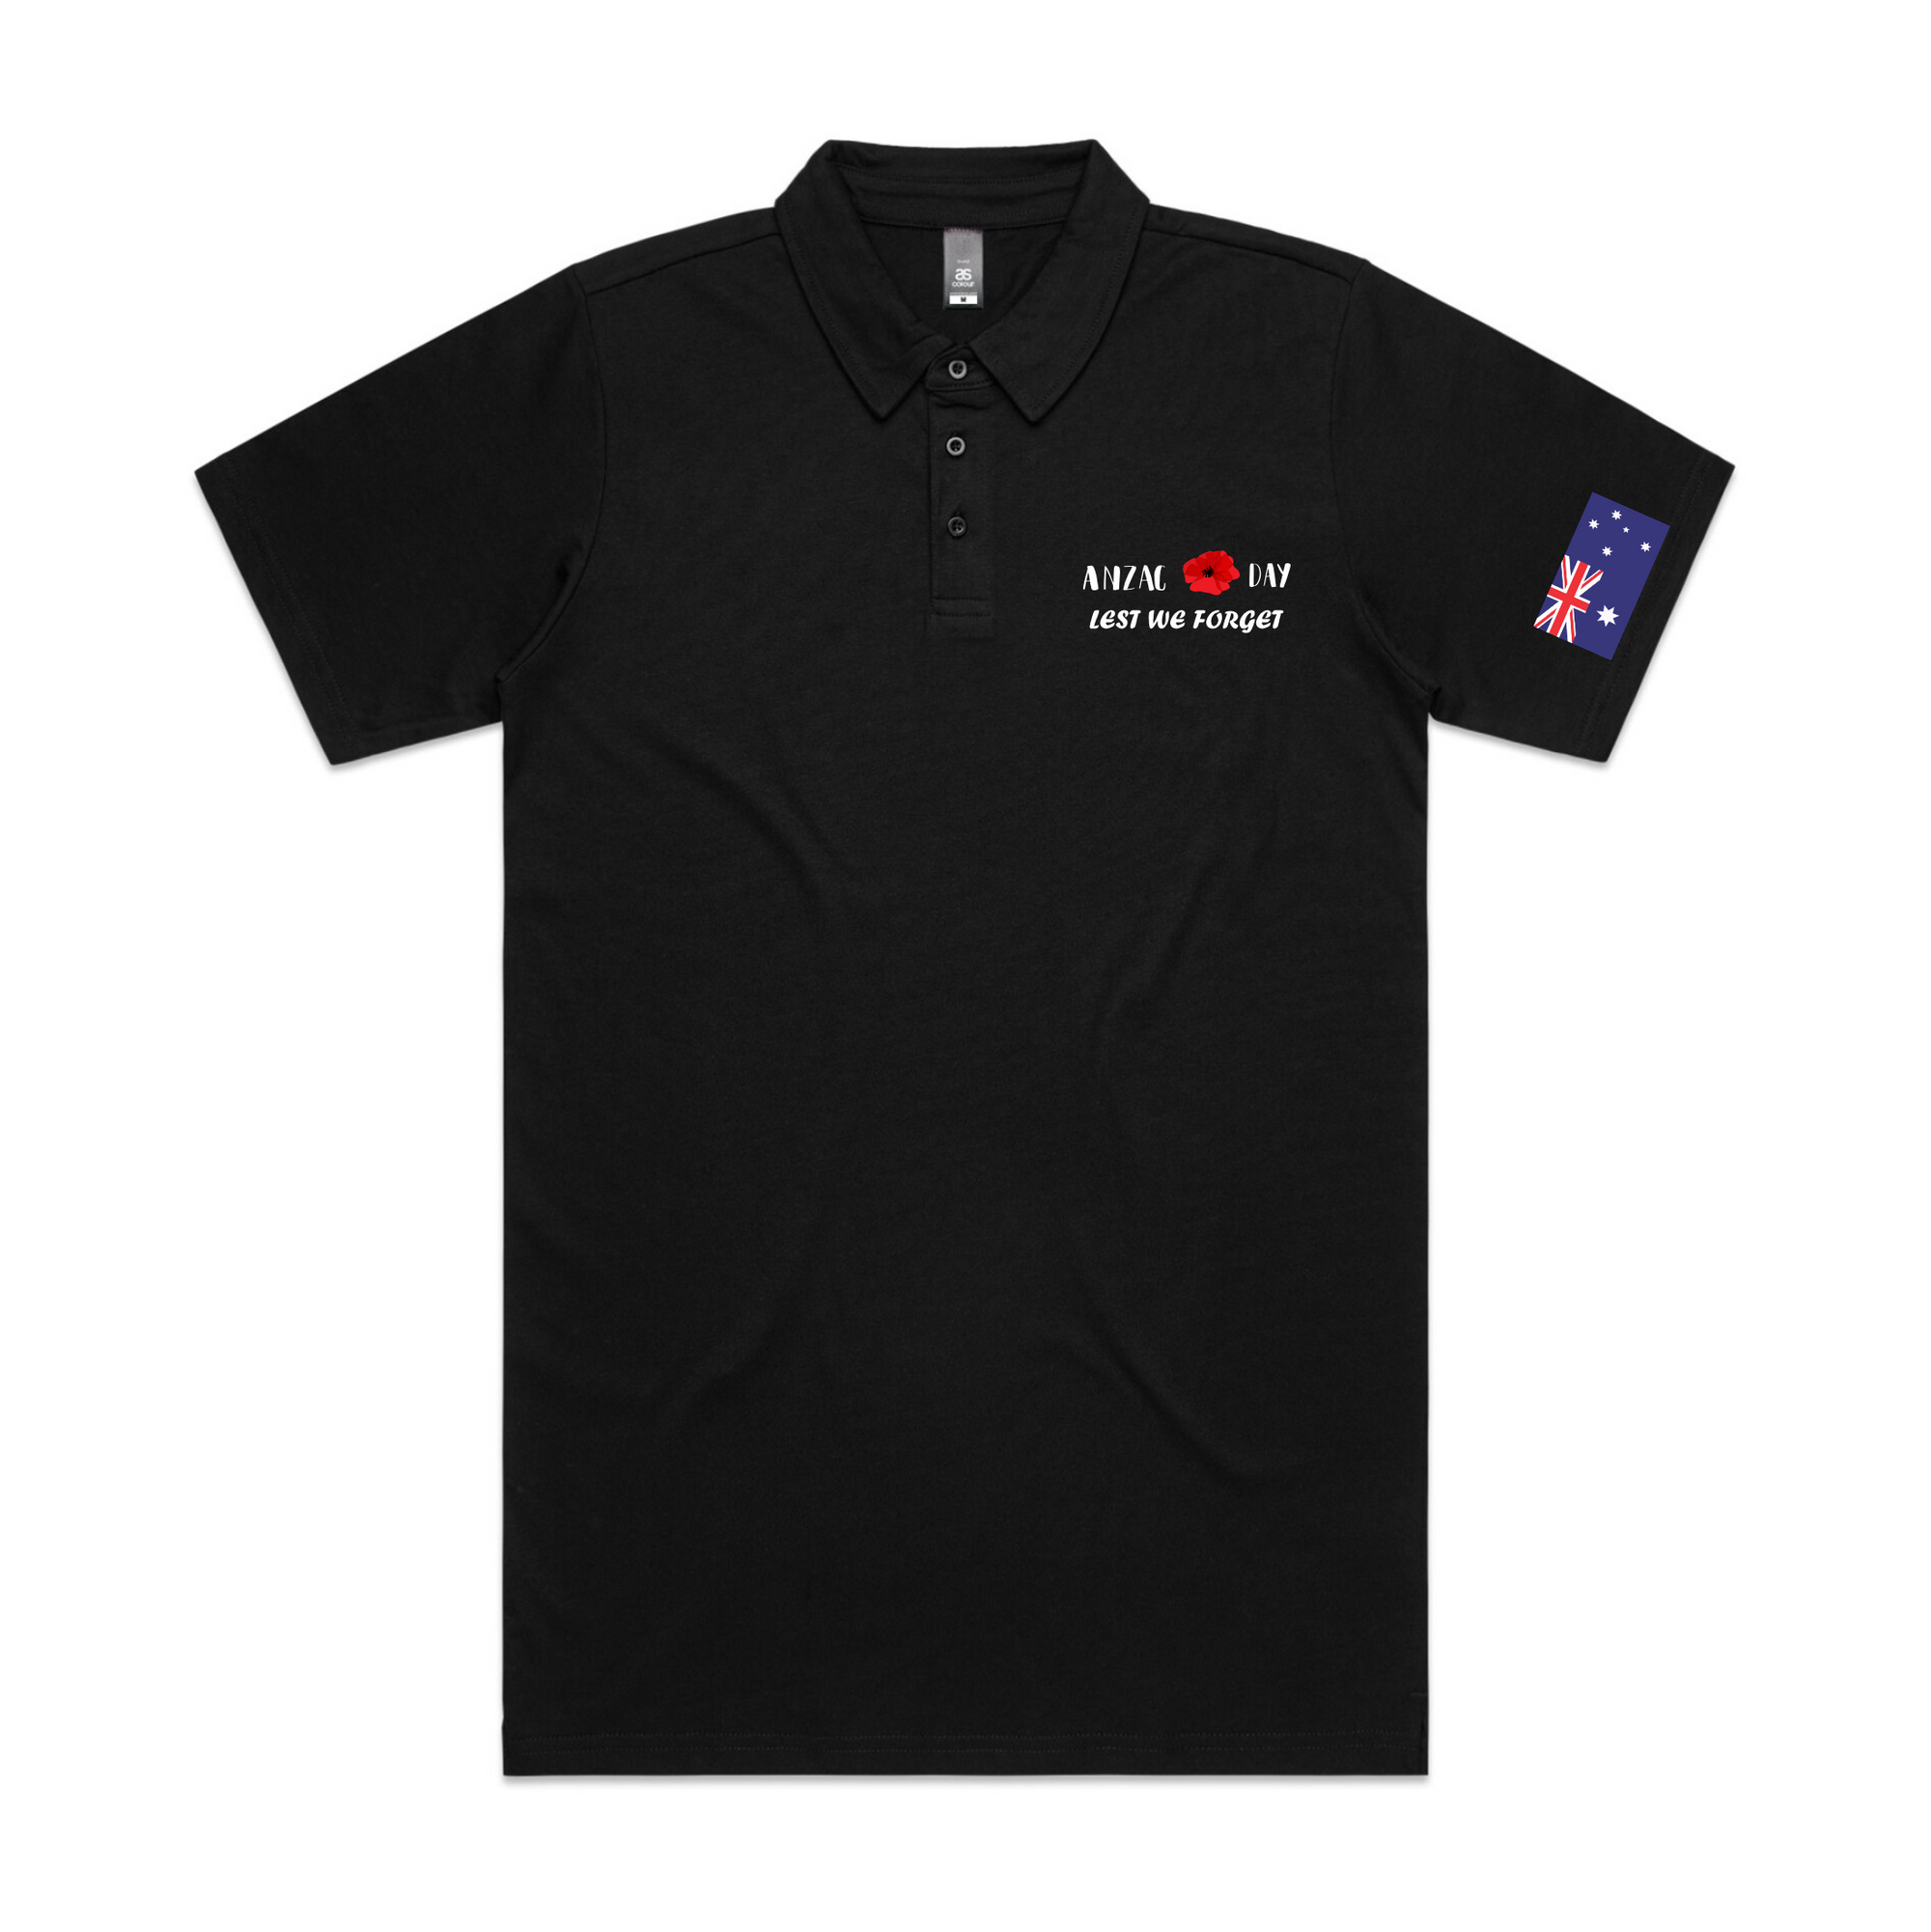 LEST WE FORGET BLACK POLO